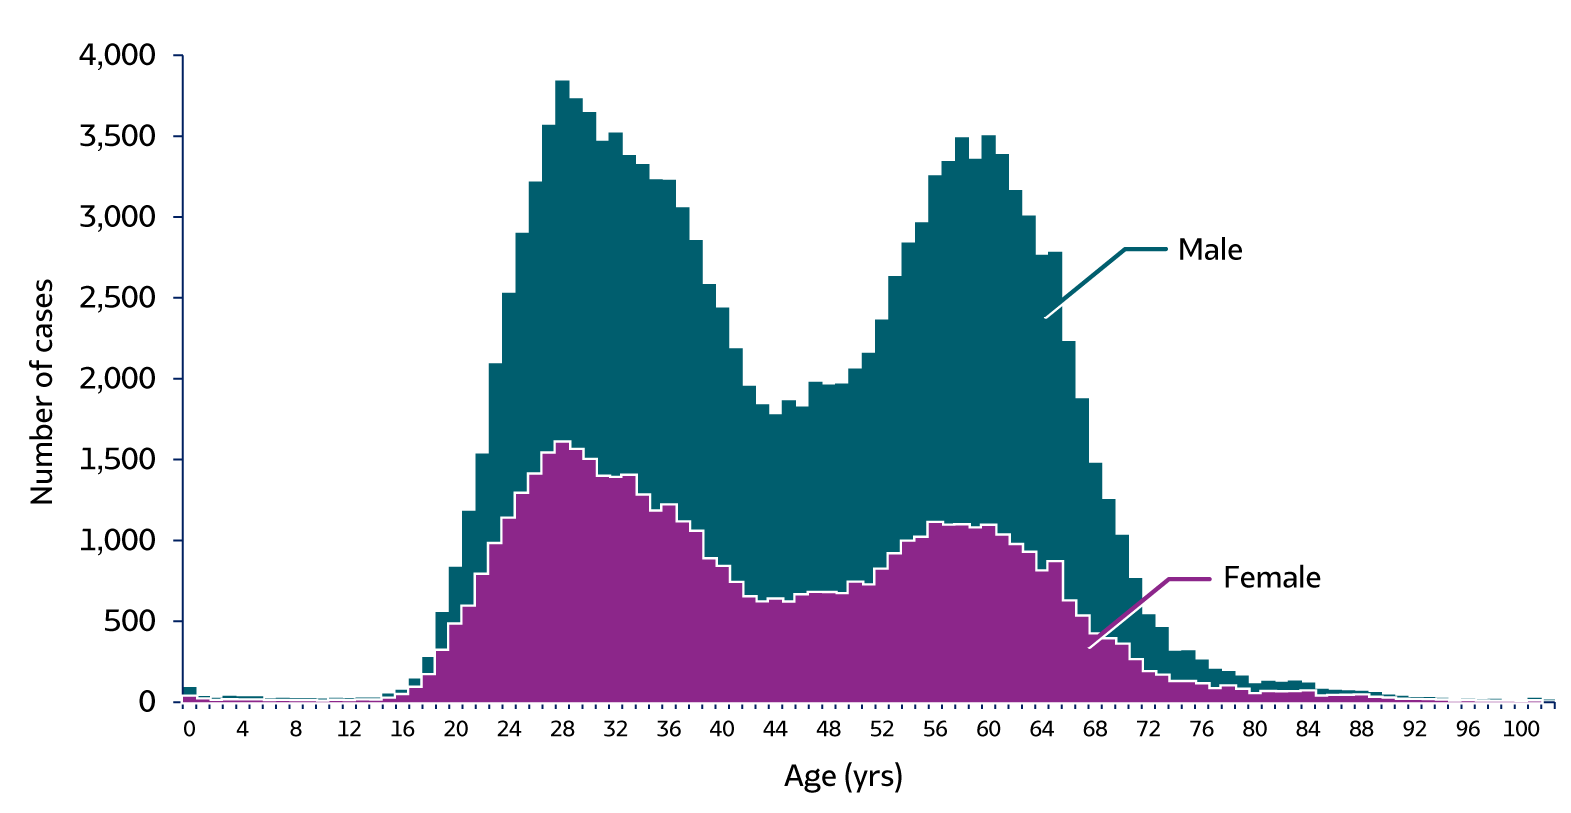 Figure 3.8. The graph shows the number of newly reported chronic hepatitis C cases by sex and age in the United States for 2018.  The graph shows a bimodal distribution with peaks in the 20 to 40 year and 55-68 years age groups.  Rates of chronic hepatitis C were consistently higher for males than for females.